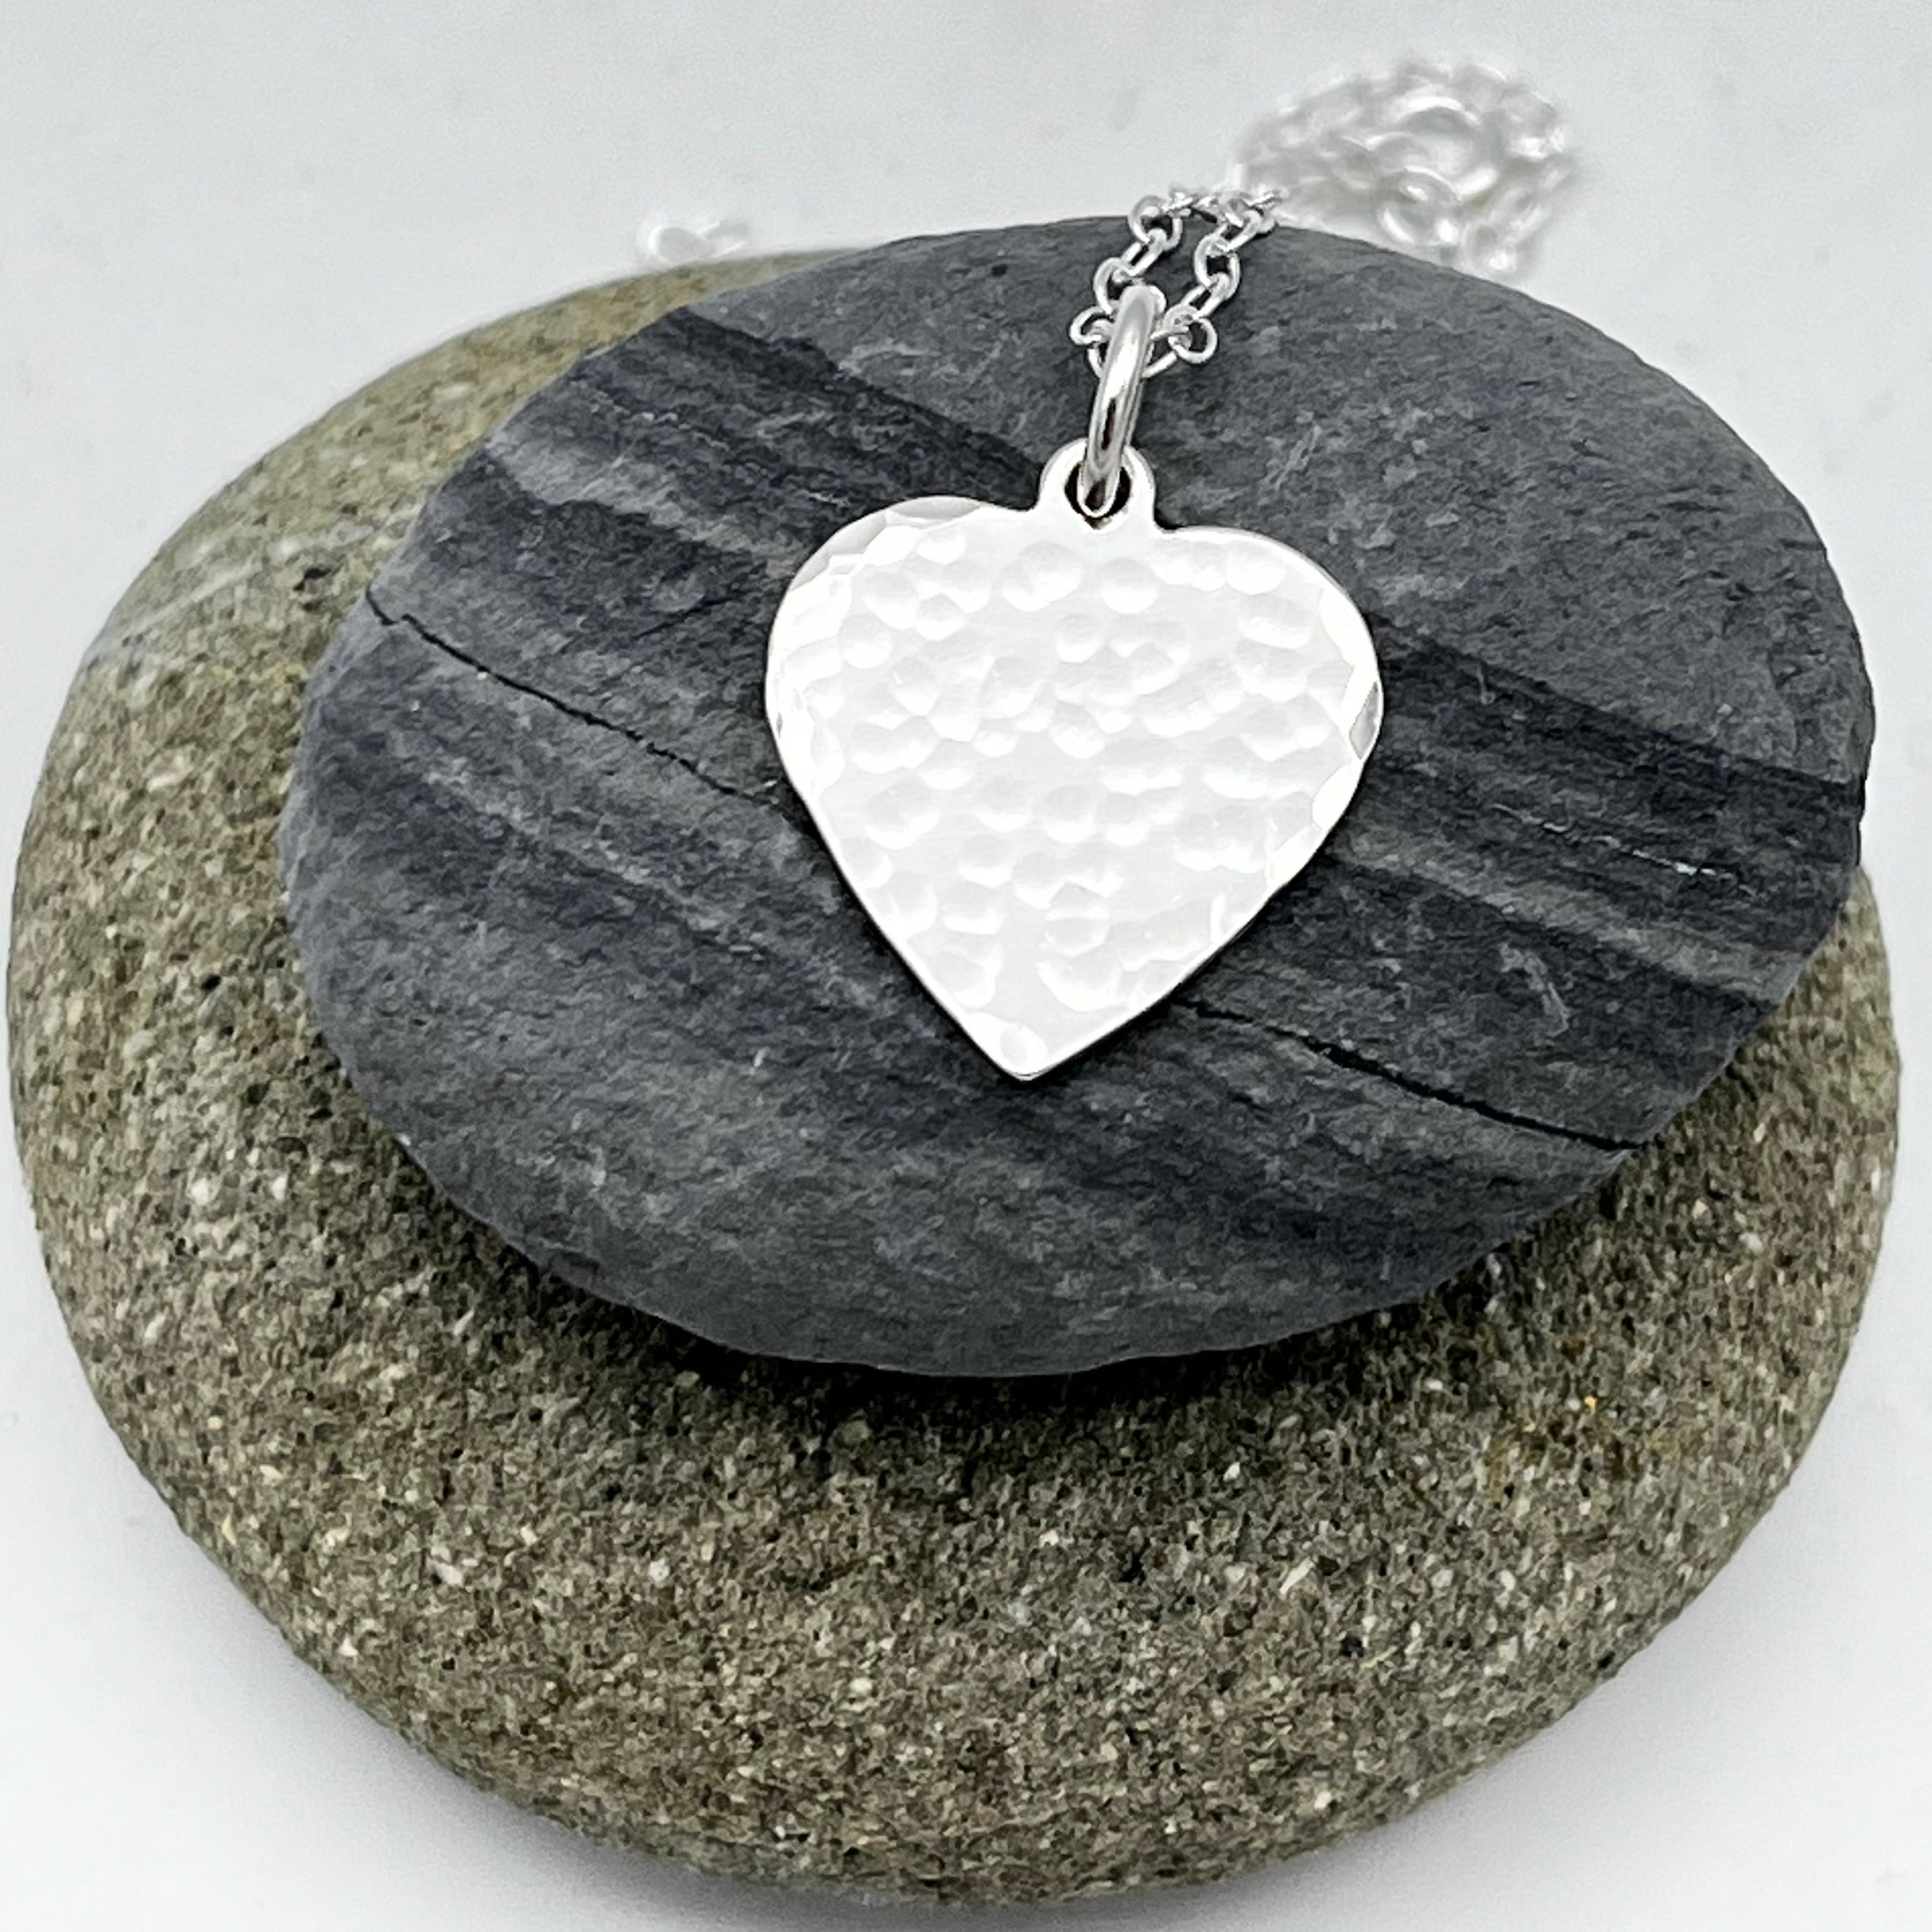 Sterling Silver single heart pendant 15mm wide hammered finish on 16" trace chain